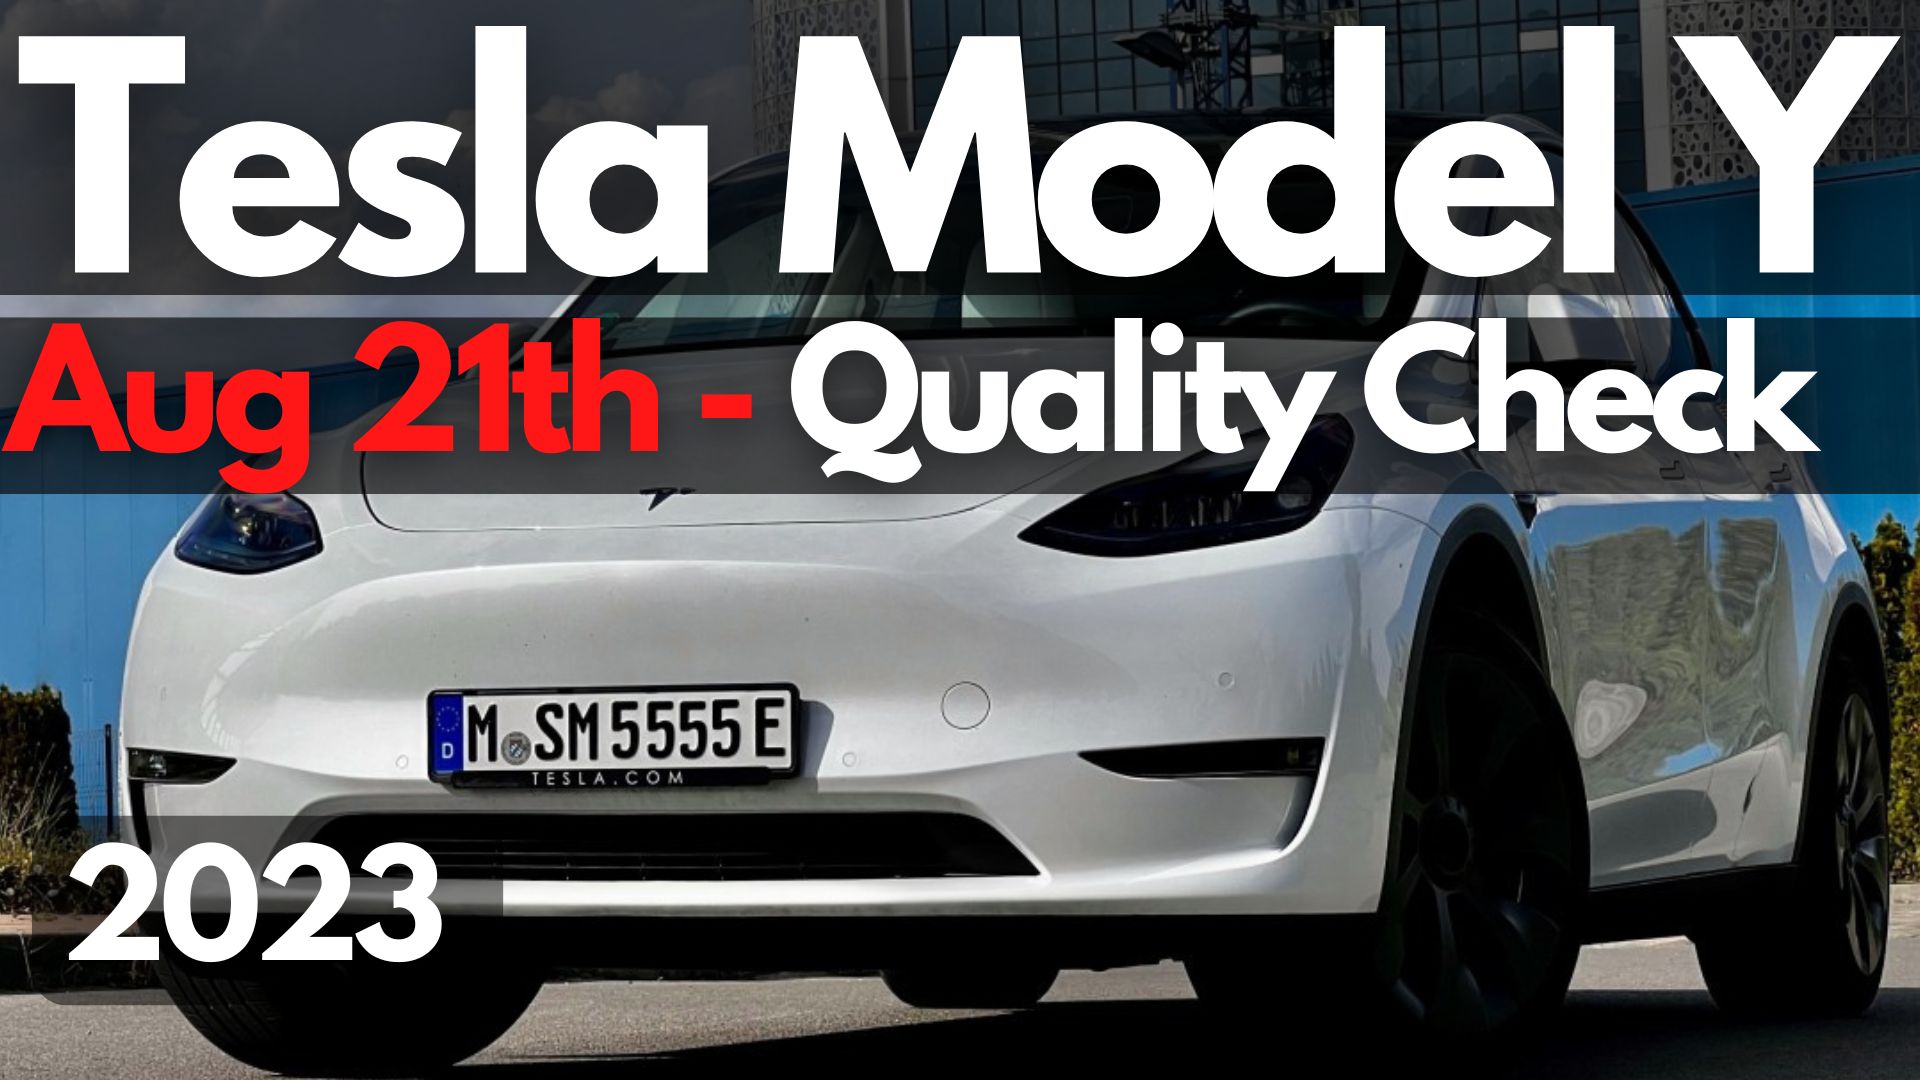 Has Tesla Improved The Model Y Build Quality For Aug 21, 2023?